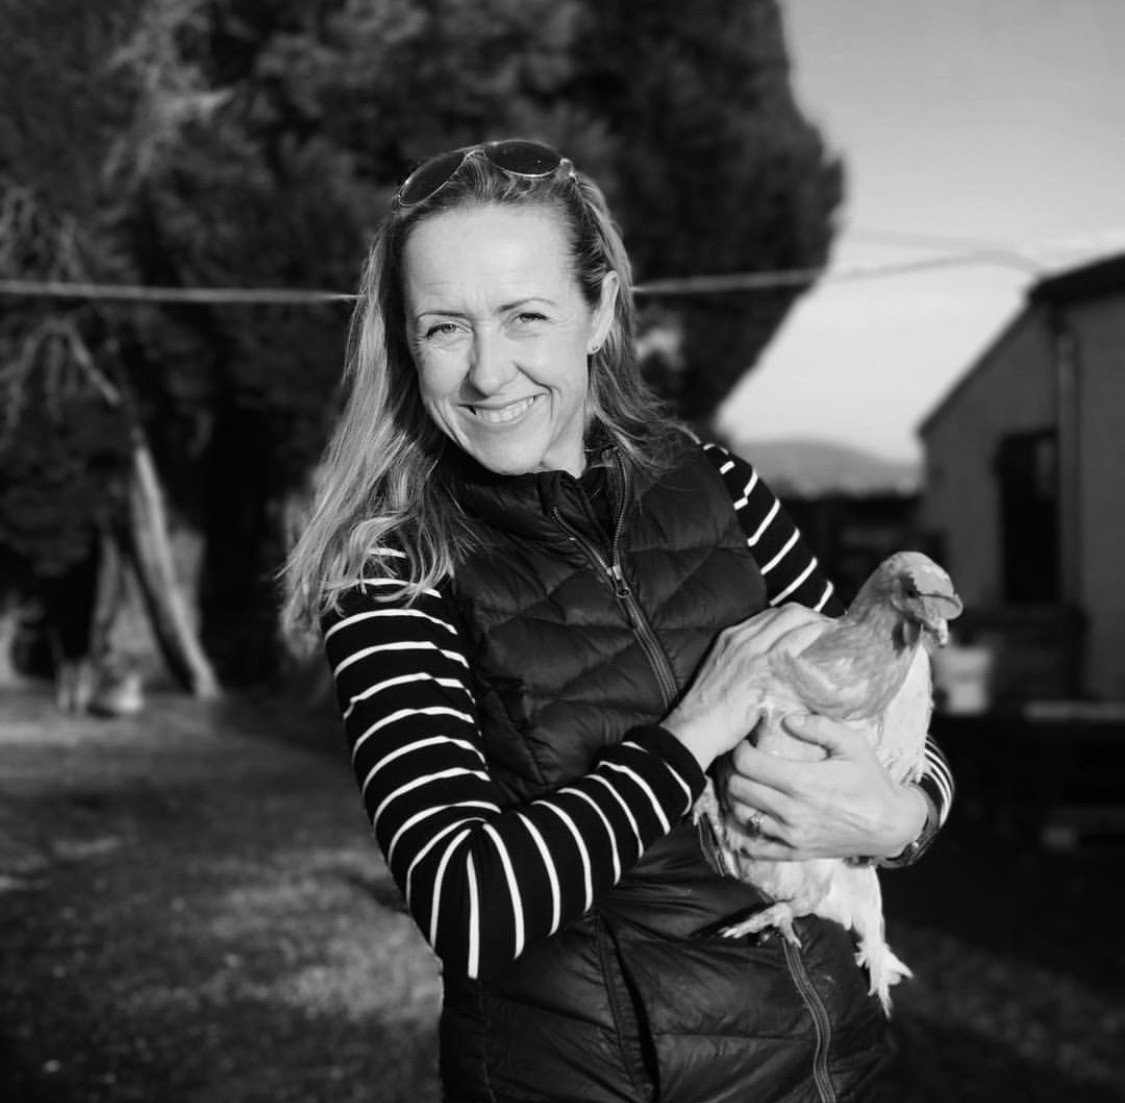 Kylie Magner of Magners Farm